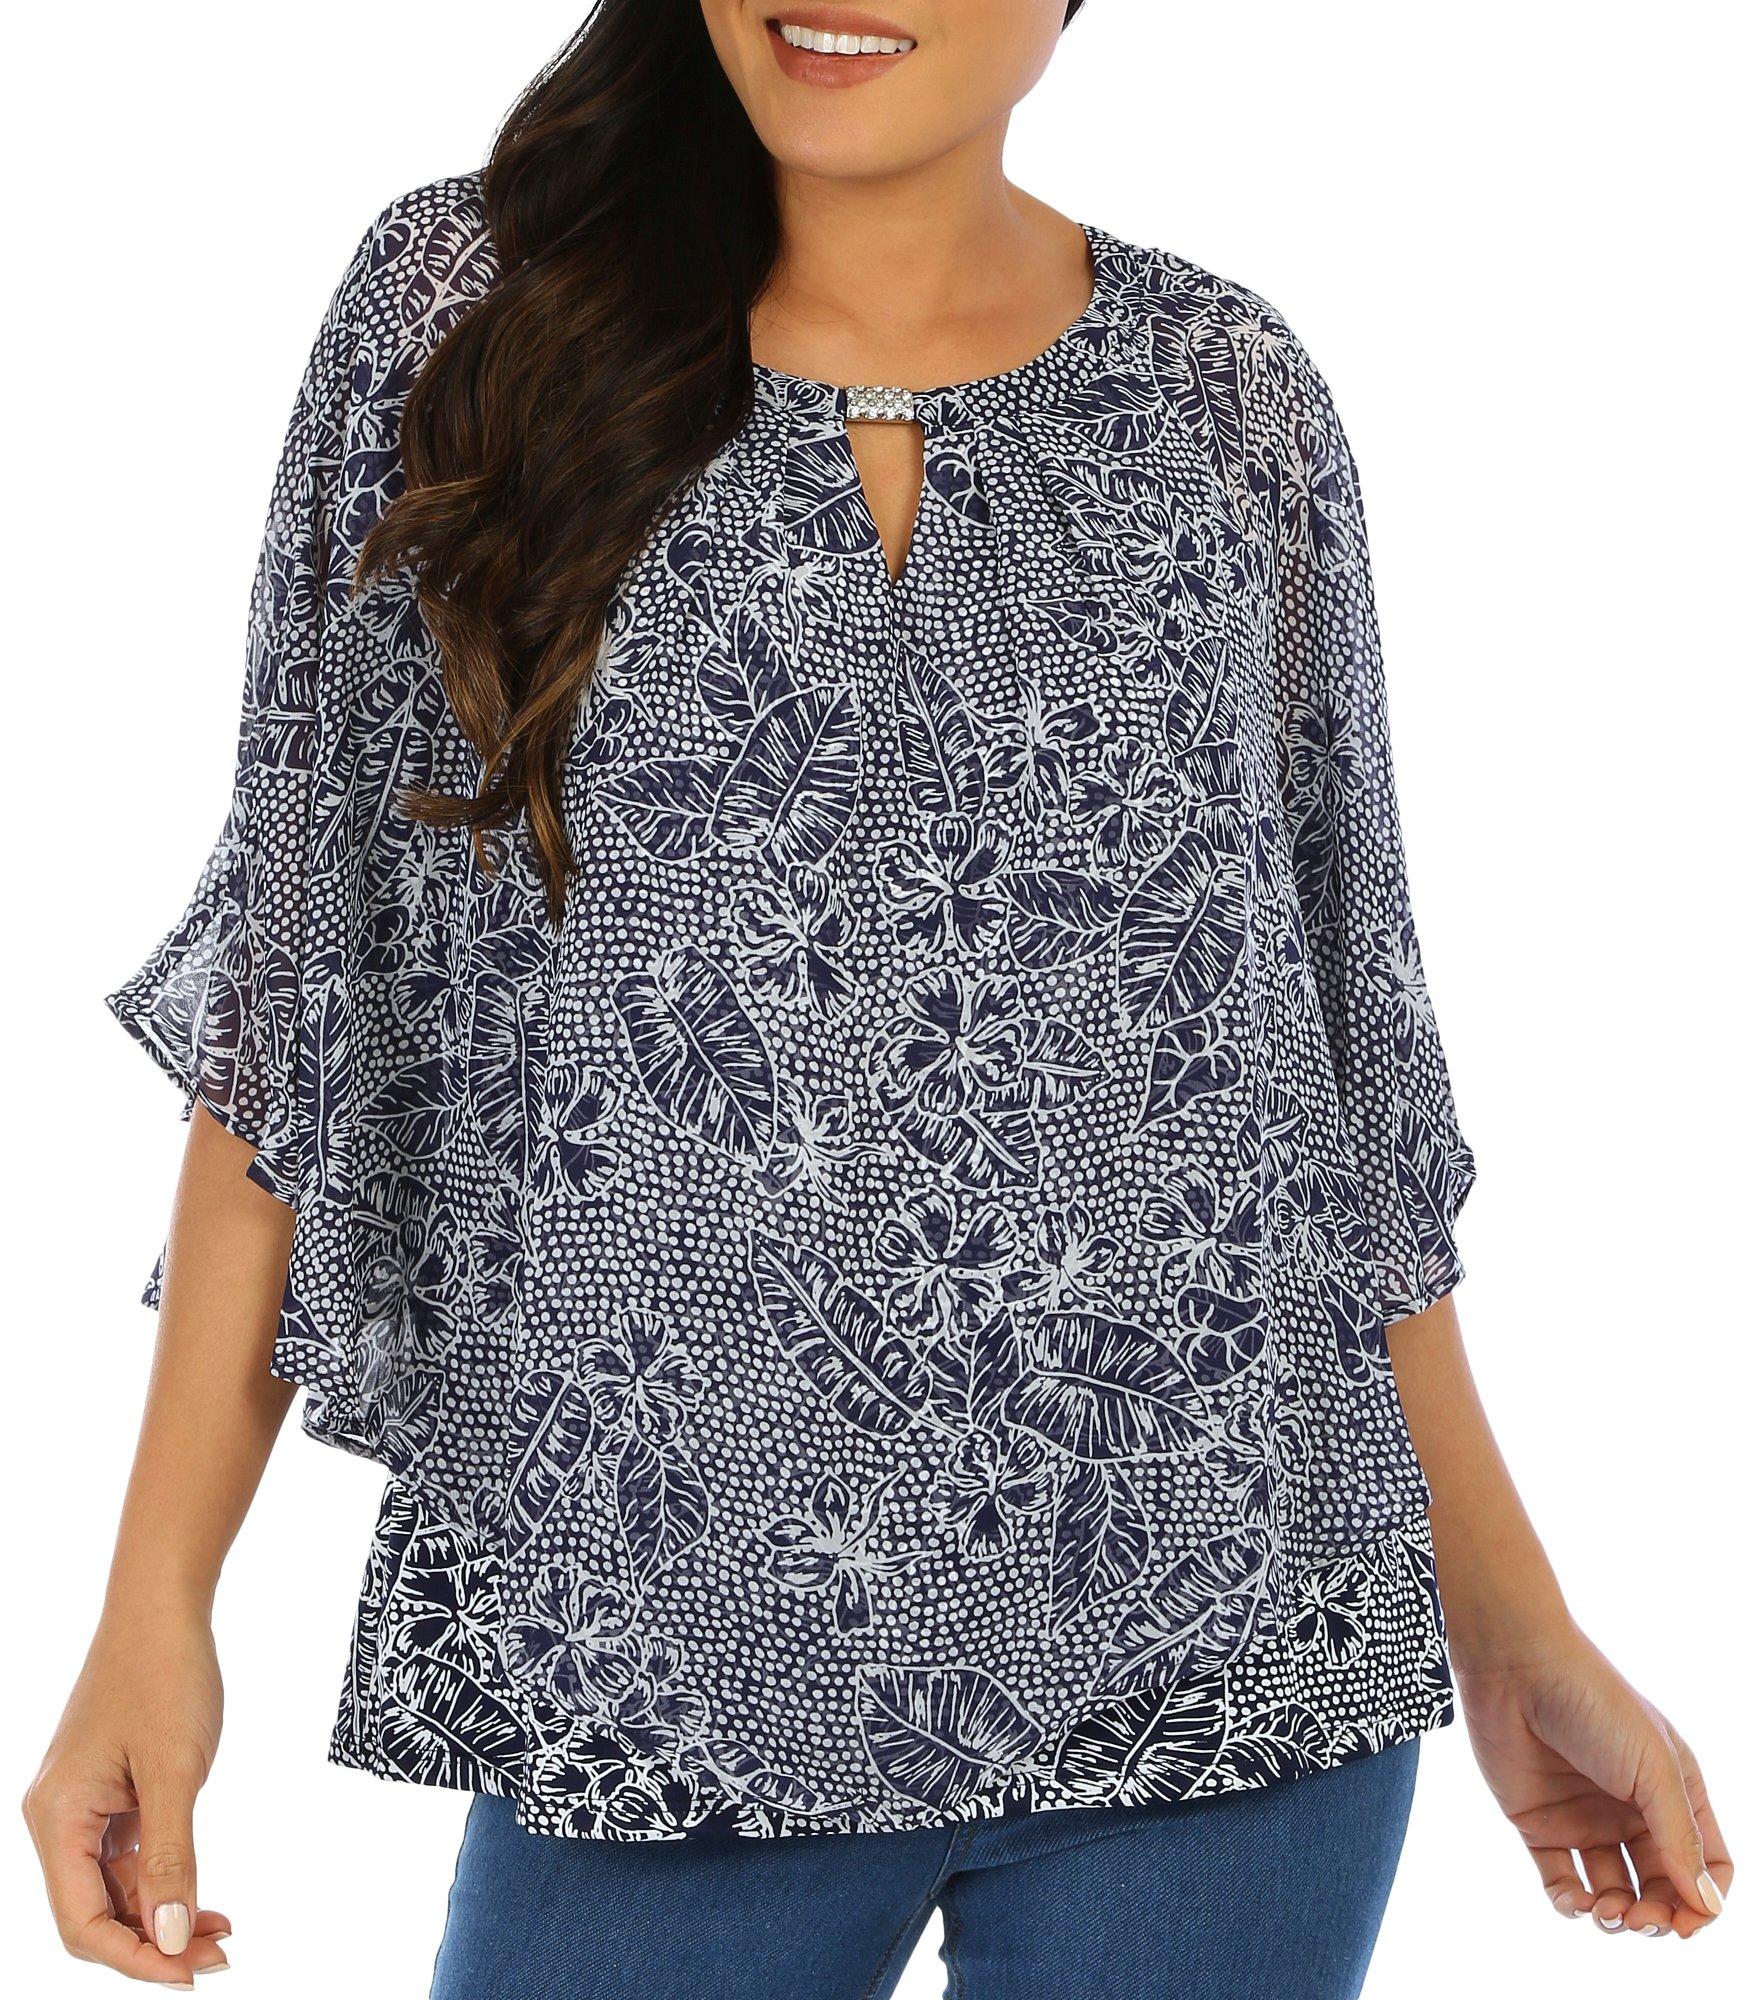 Juniper + Lime Womens Mixed Print Embellished Poncho Top